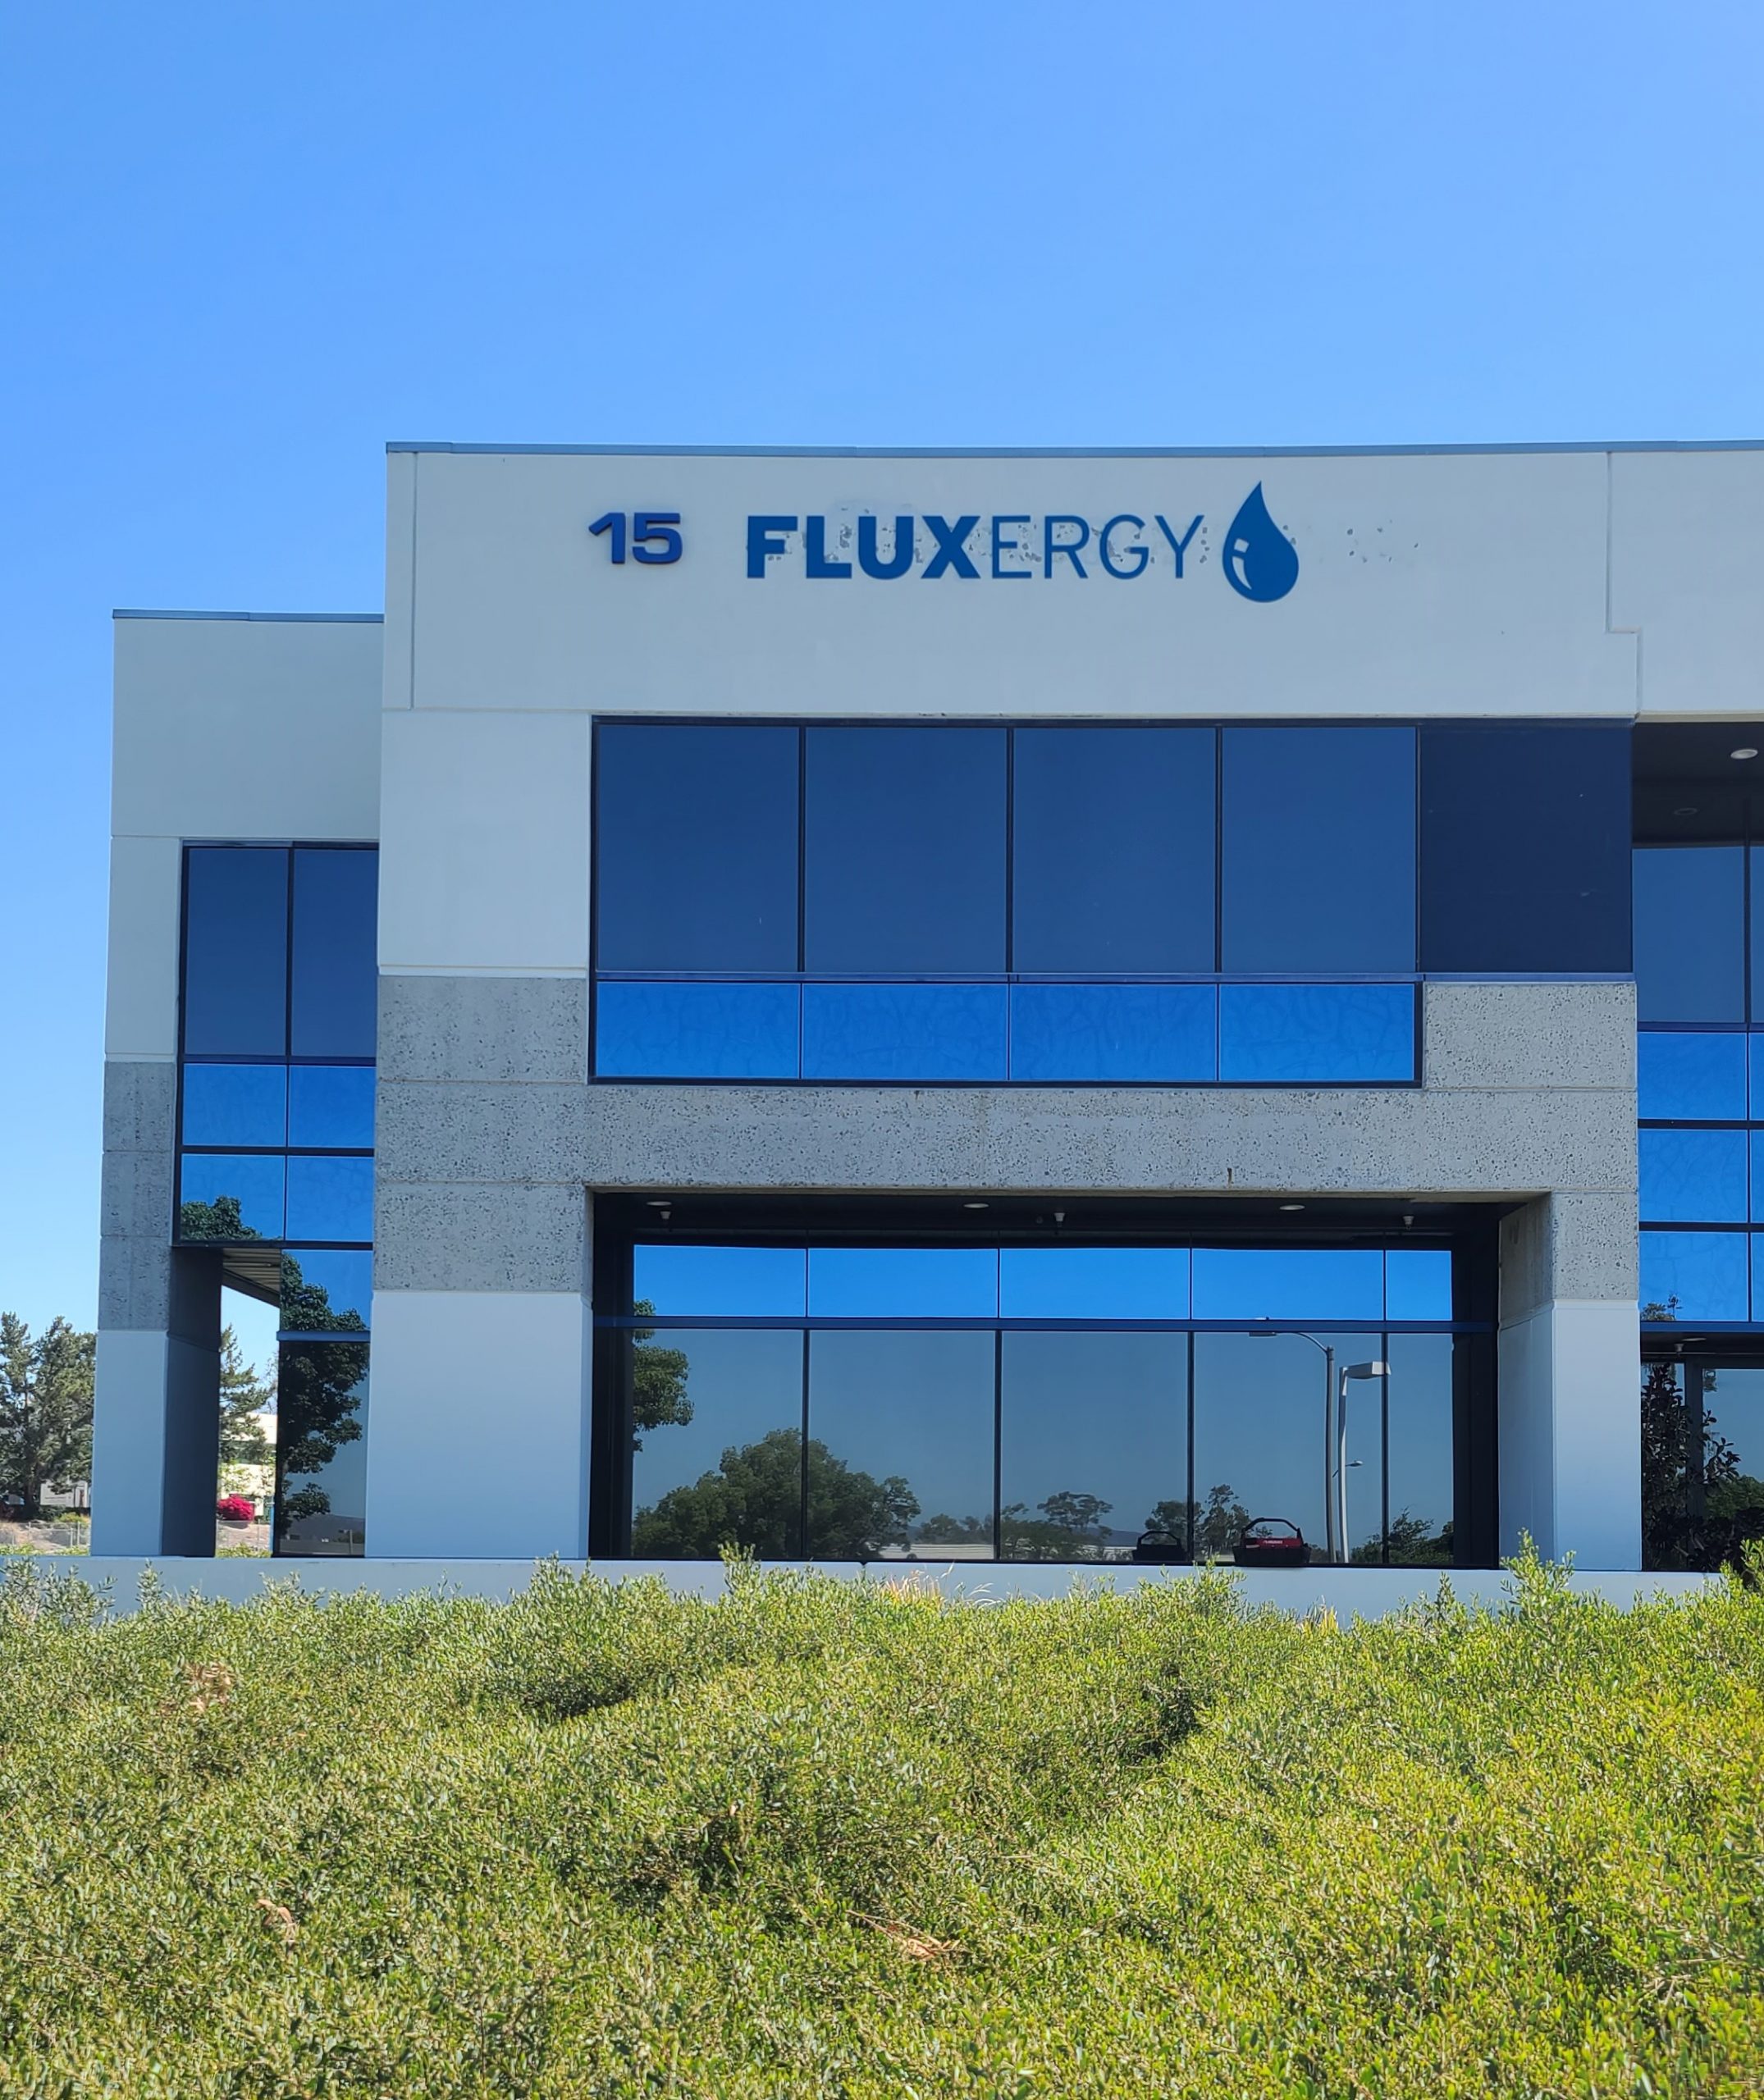 These are the exterior dimensional letter sign sets we fabricated and installed for Fluxergy as part of a sign package for their Irvine building.